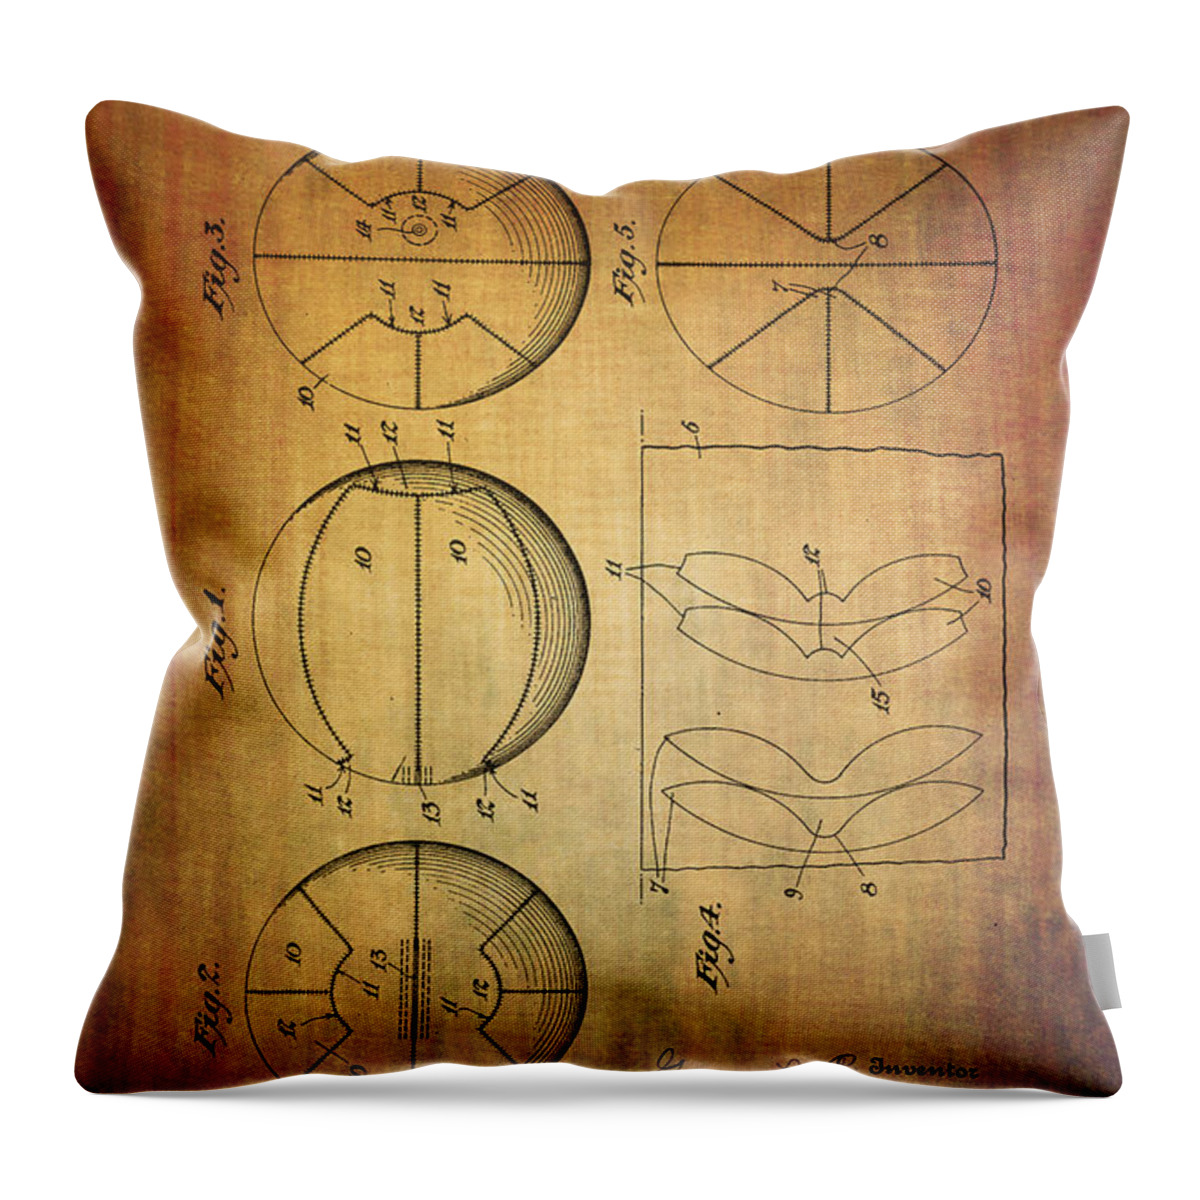 Patent Throw Pillow featuring the digital art Basket ball patent from 1929 by Eti Reid